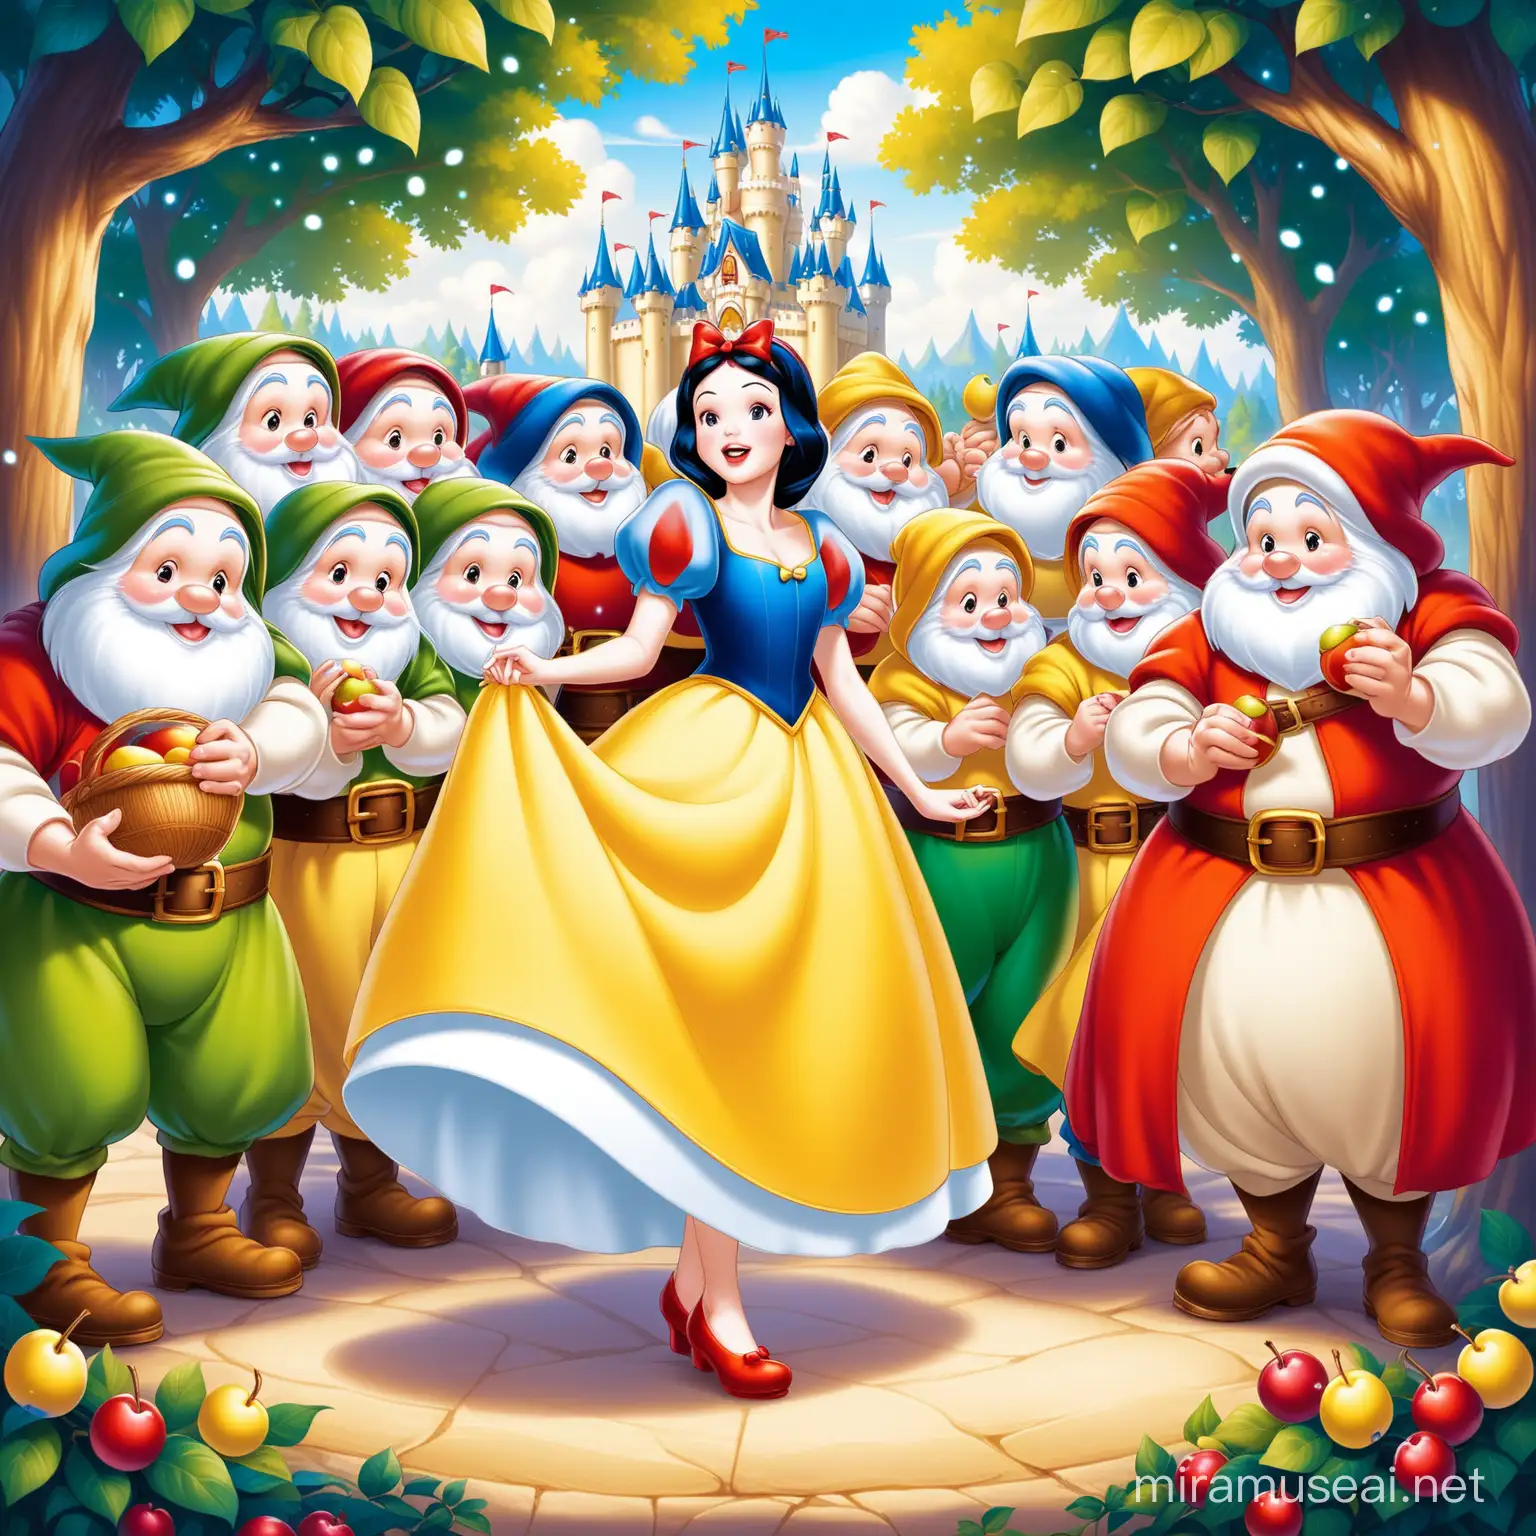 Snow White and the Seven Dwarfs in Enchanted Forest Scene